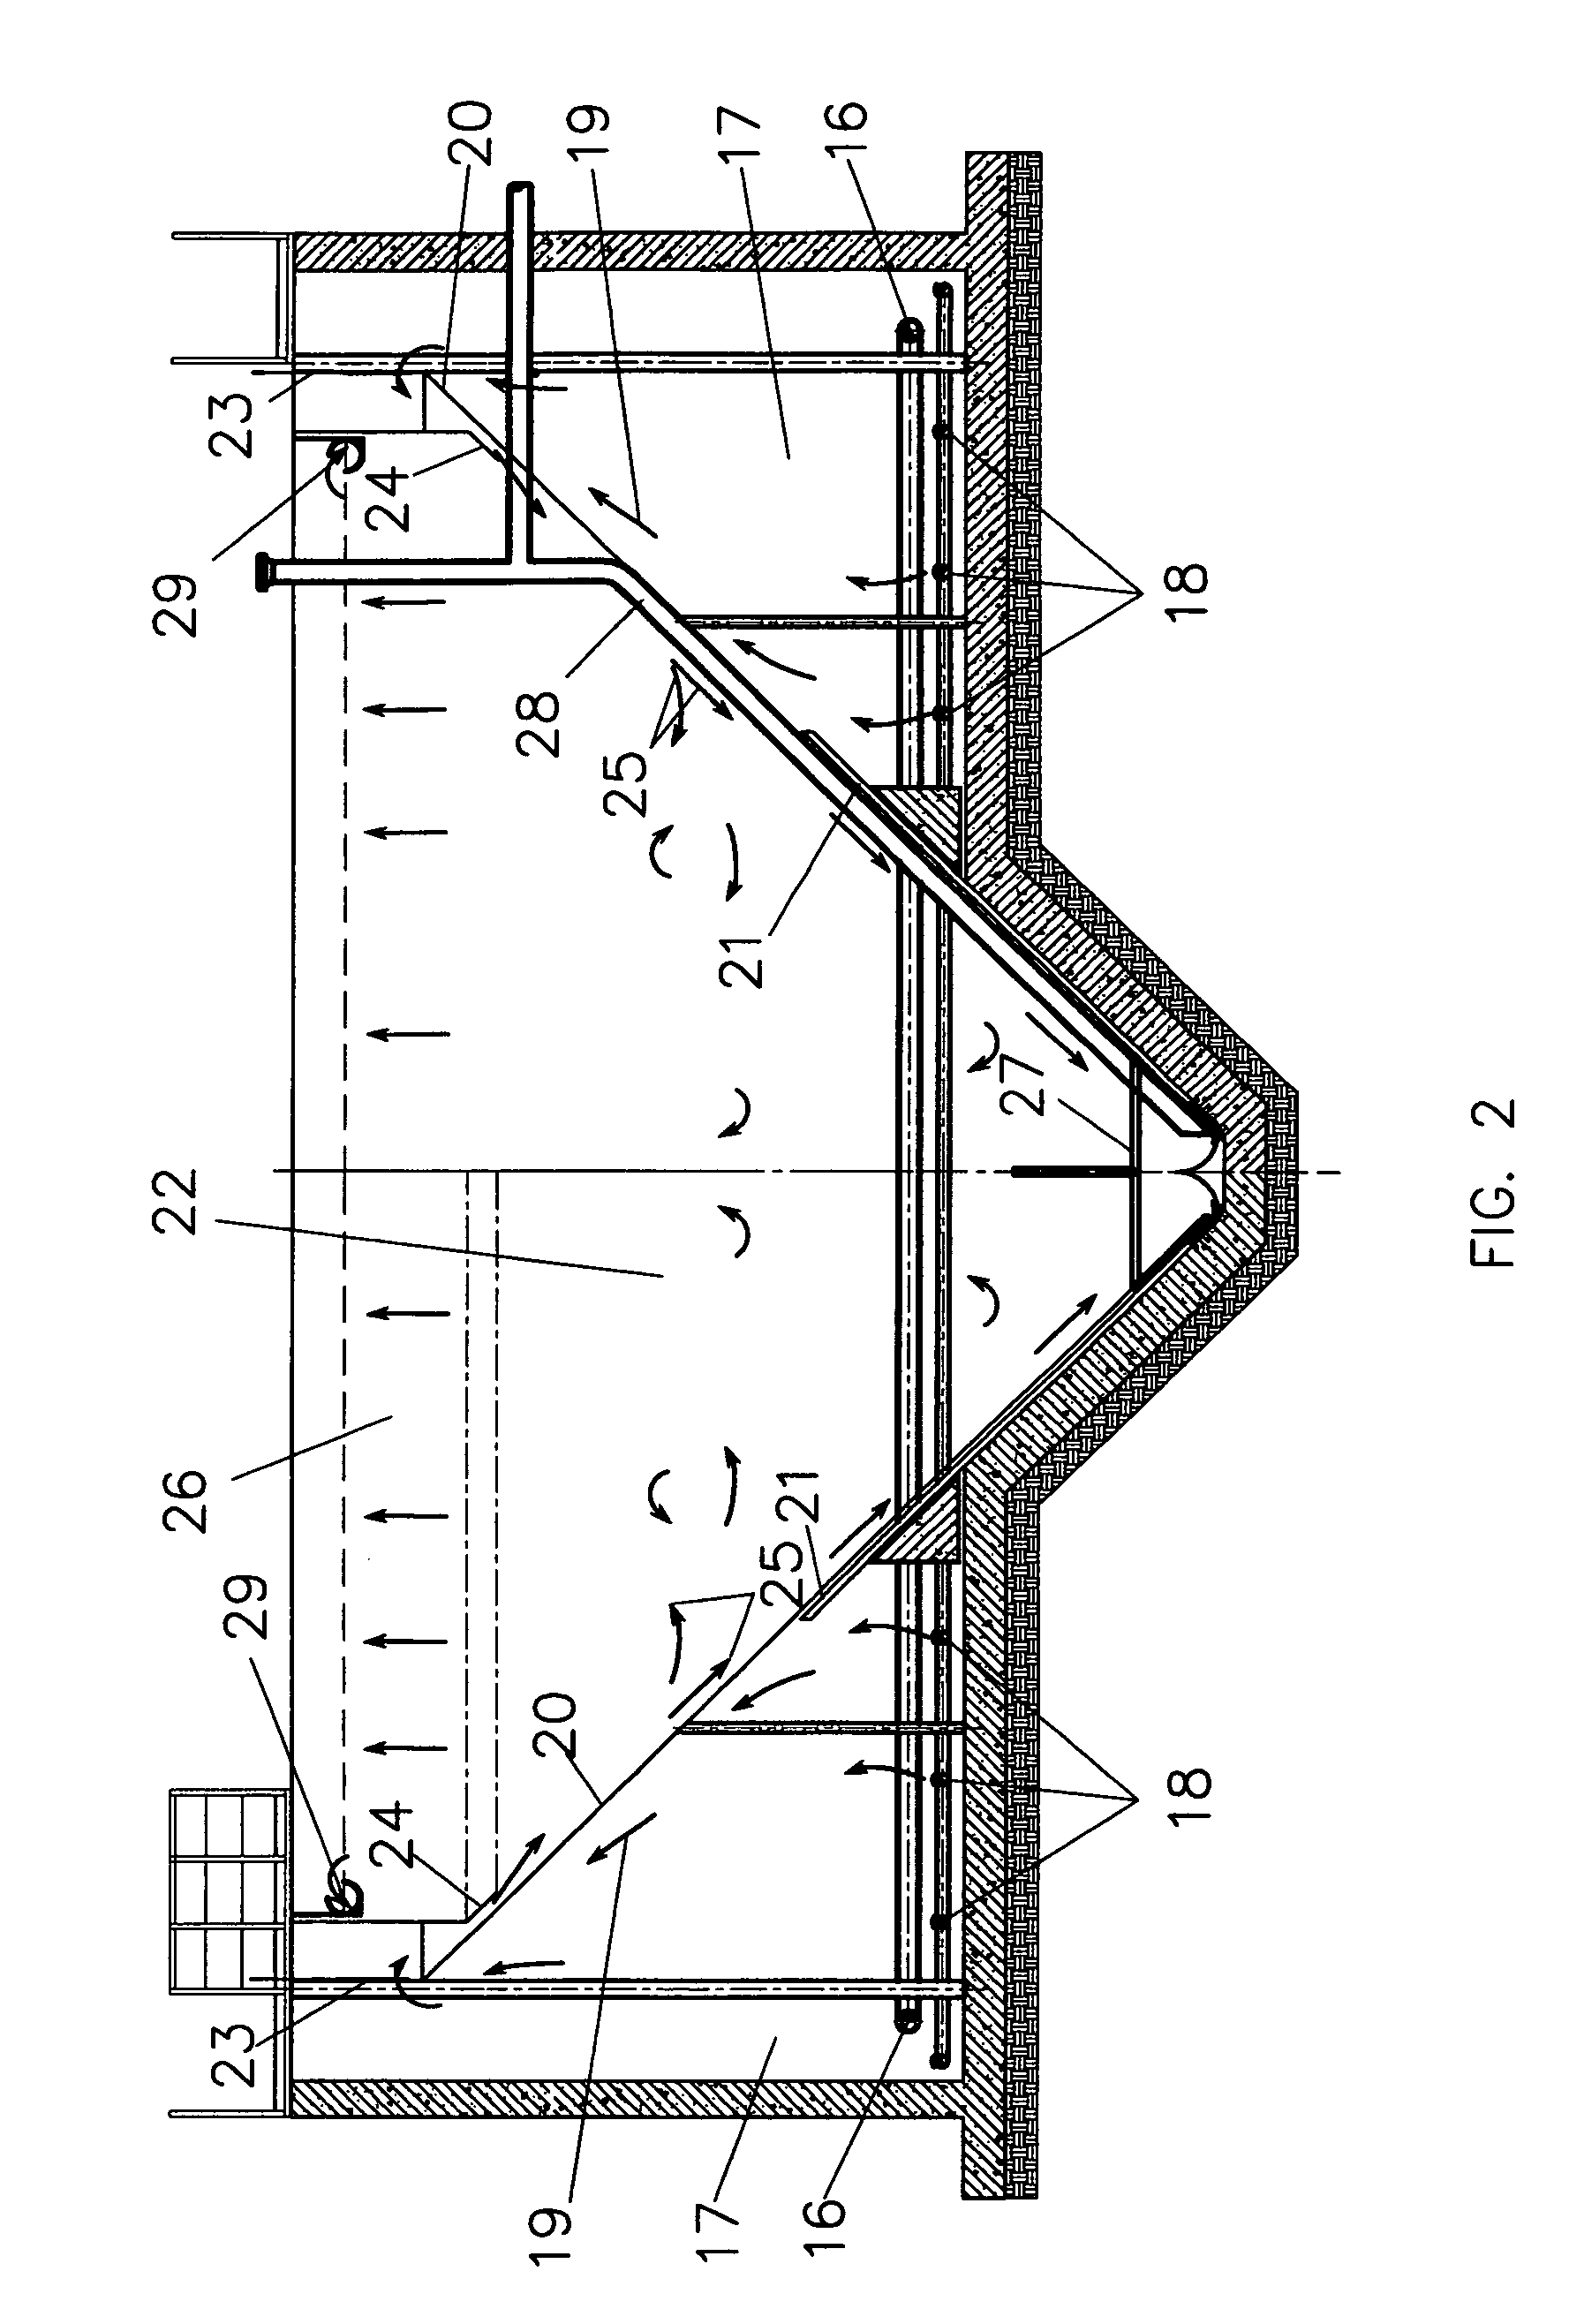 Method and apparatus for activated sludge biological treatment of municipal and industrial waste water